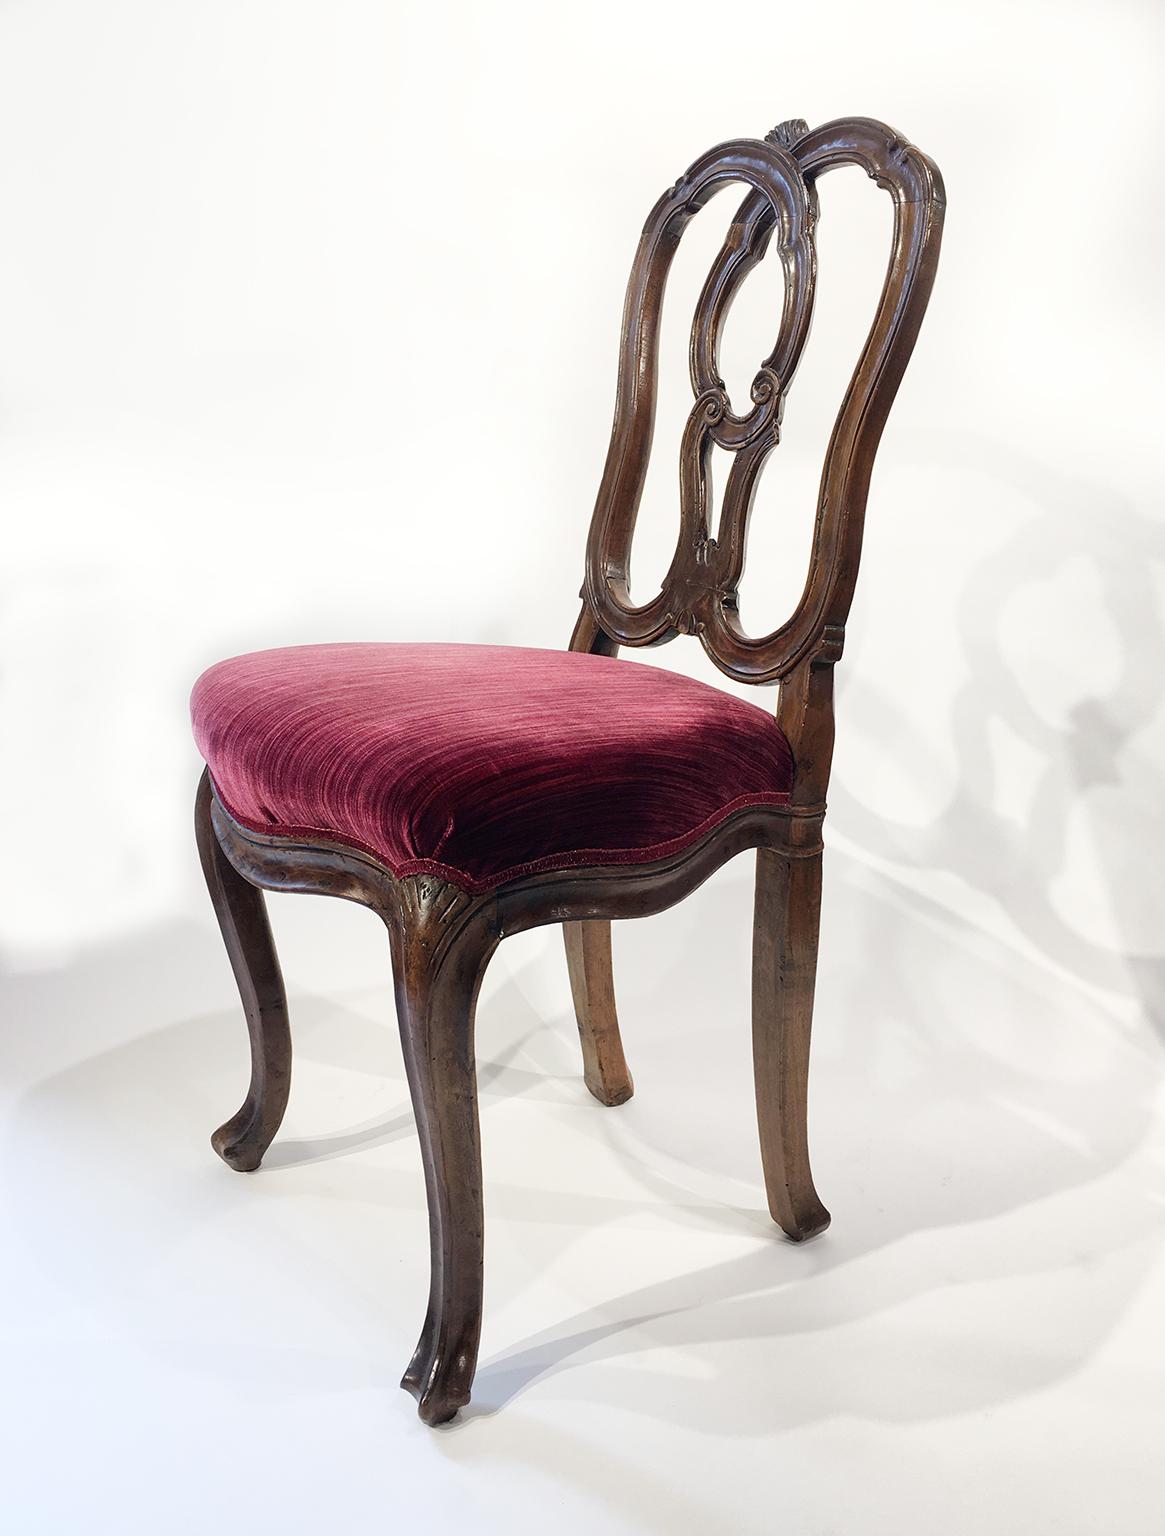 Six carved walnut chairs
Venice, mid-18th century
Height 35.03 in (18.70 in to the seat) x 19.09 in x 18.30 in 
(89 cm - 47.5 cm to the seat - x 48.5 cm x 46.5 cm)
lb 80 (kg 36)
State of conservation: slight chipping on the edges and some signs of